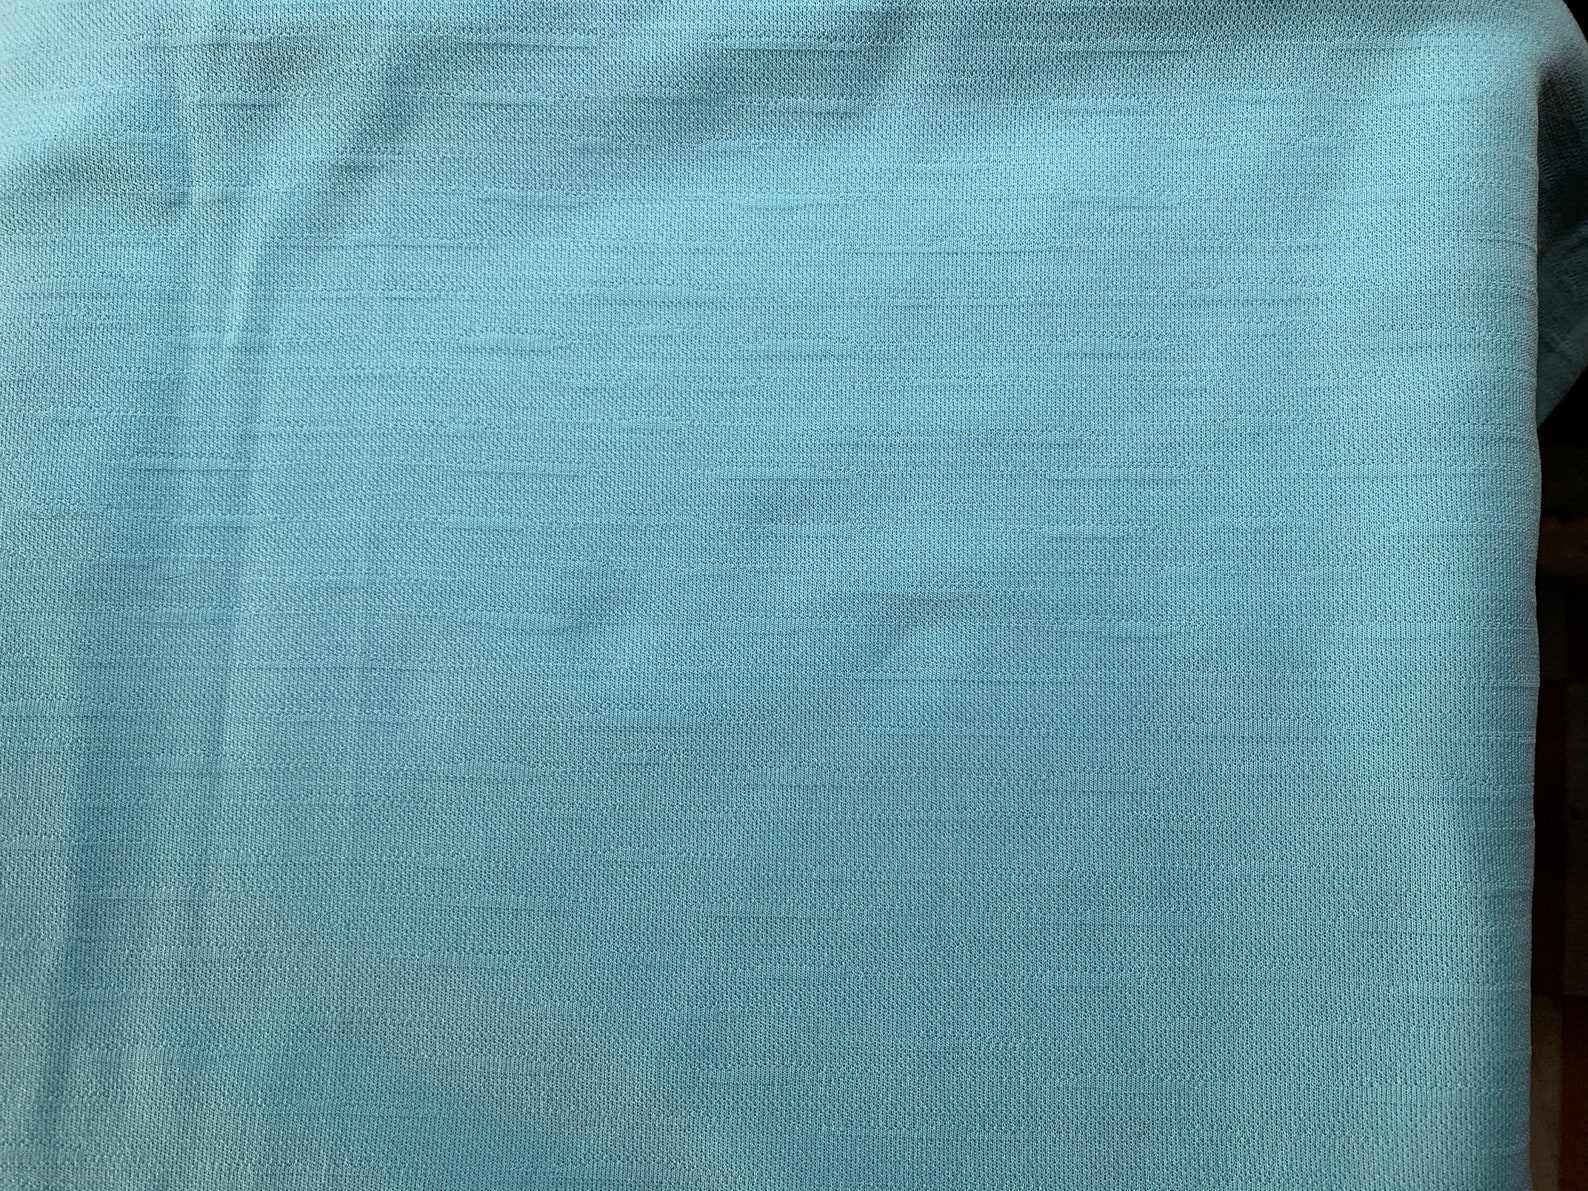 Vintage Robins Egg Blue Polyester Knit Fabric // 50x62 - Etsy